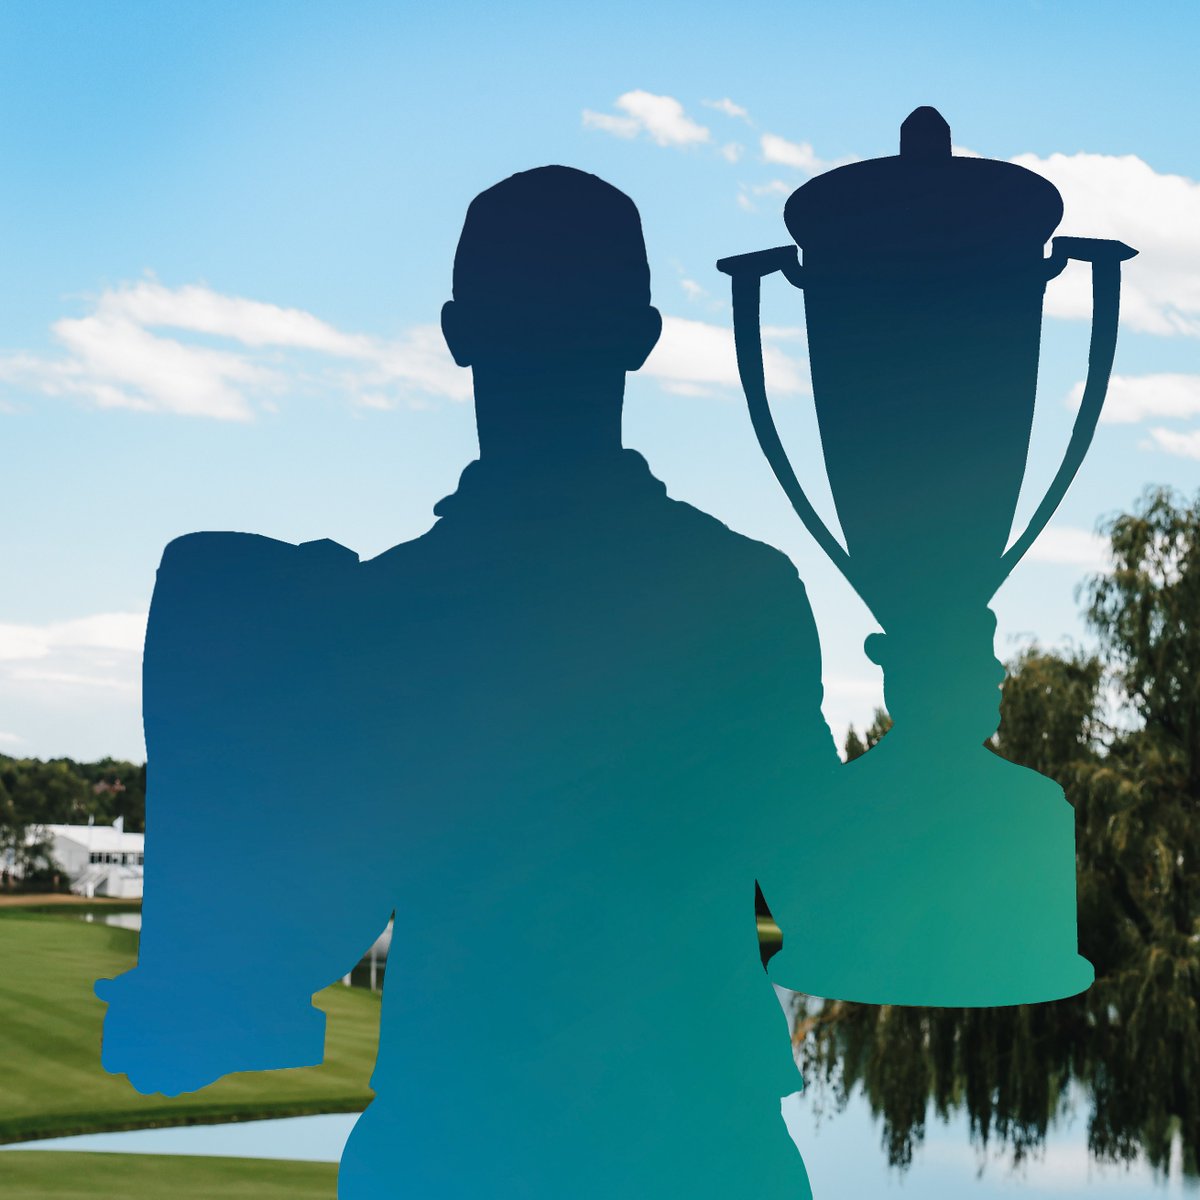 Can you guess the #BMWCHAMPS winner? Hint: This was his second career PGA TOUR win. Hint No. 2: He won the #BMWCHAMPS and Tour Championship en route to winning that year’s FedExCup. Hint No. 3: He won the #BMWCHAMPS in Colorado.